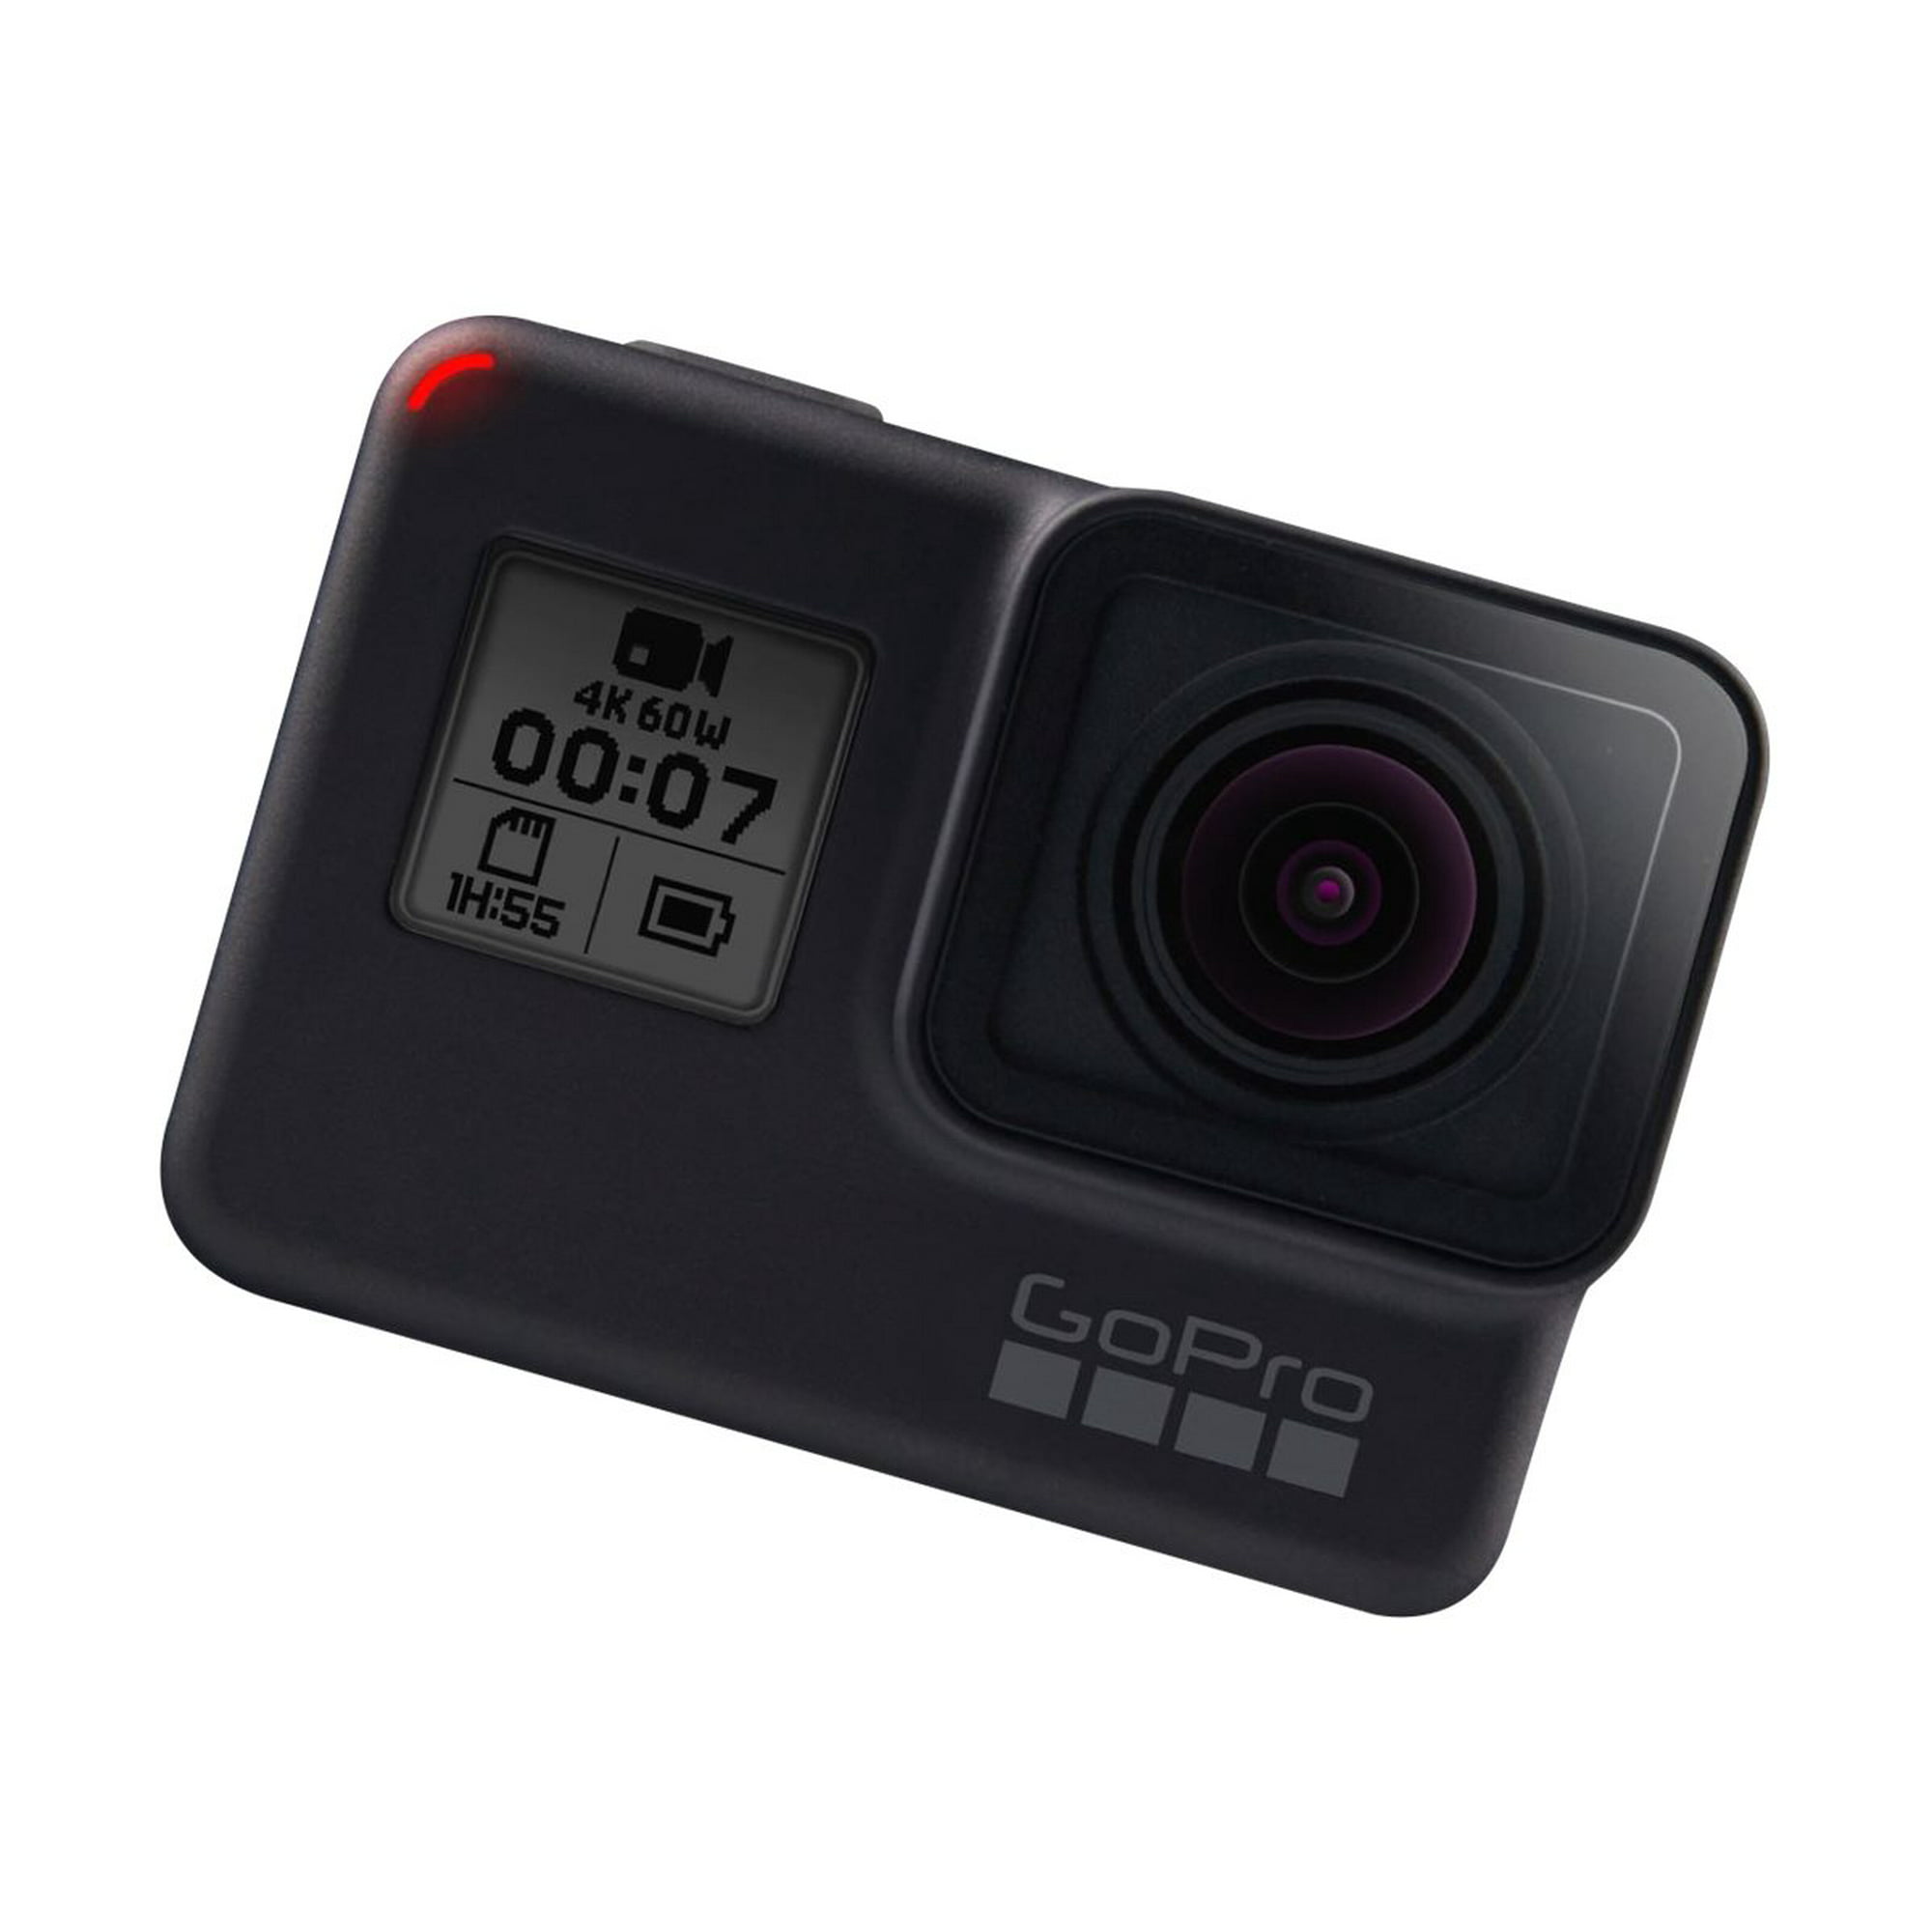 GoPro HERO7 Black - Action camera - 4K / 60 fps - 12.0 MP - Wi-Fi,  Bluetooth - underwater up to 30ft